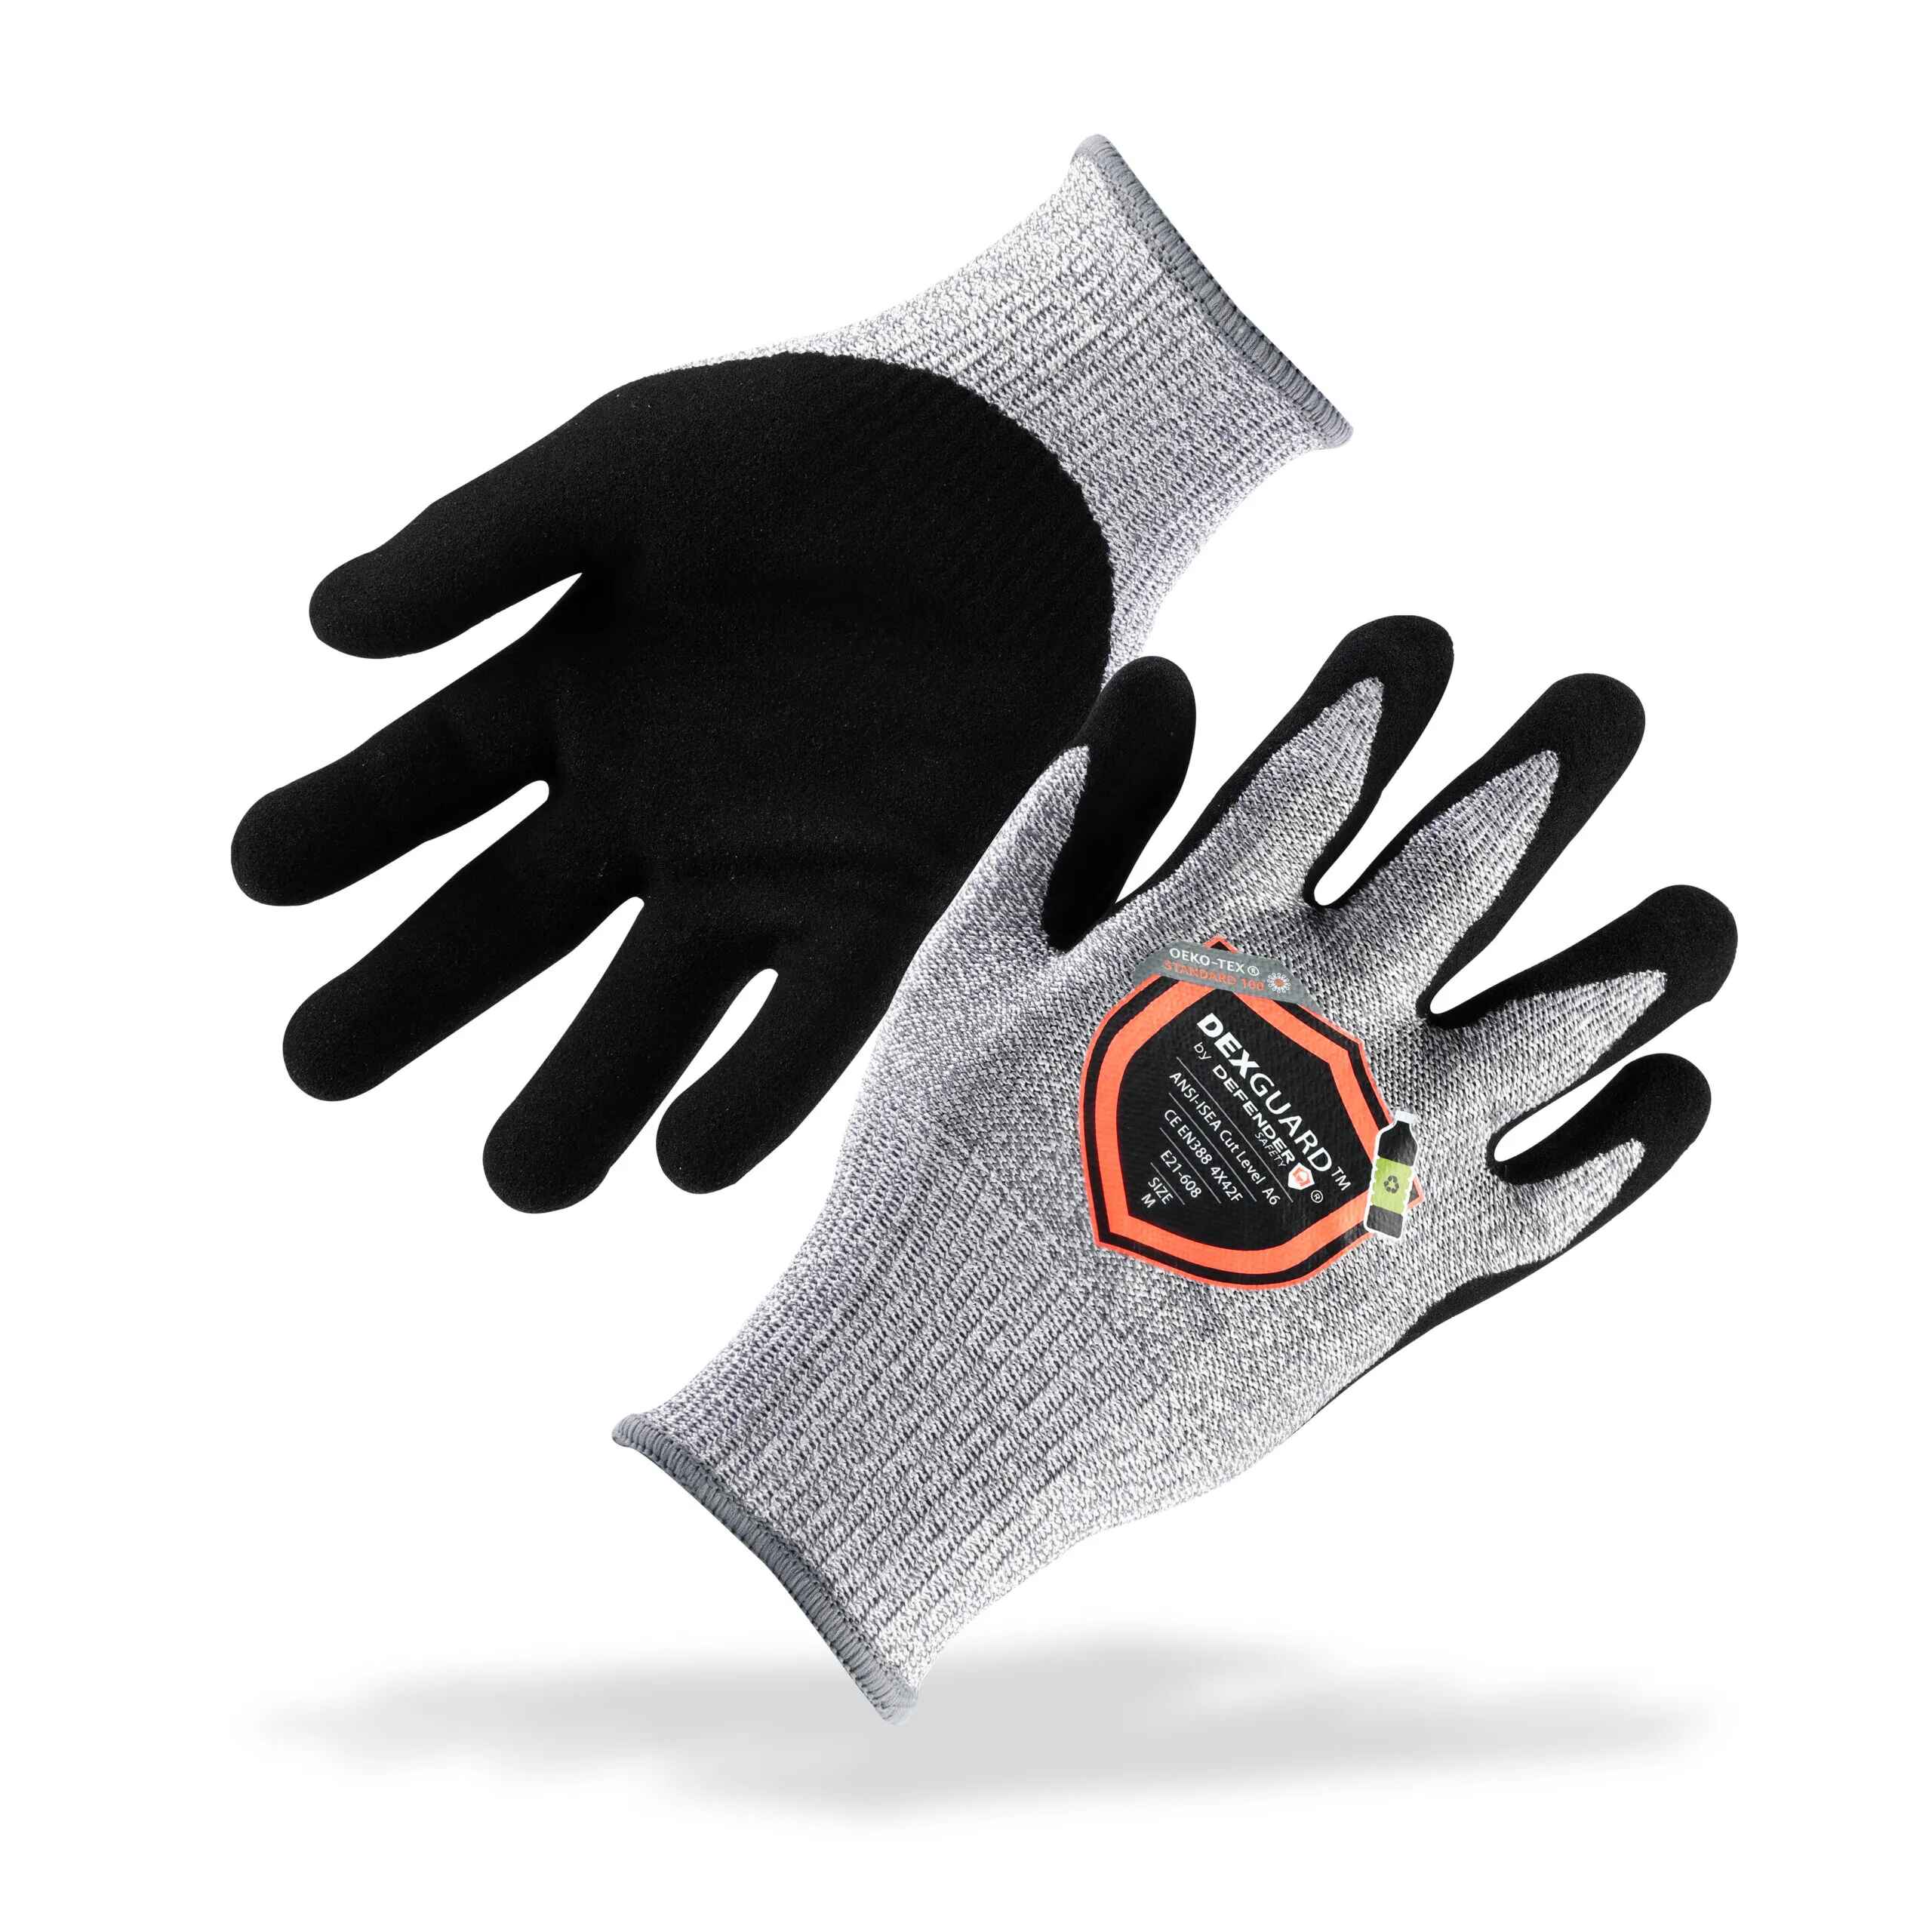 A6 Cut Resistant Gloves, Level 4 Abrasion Resistant, Textured Nitrile Coating, Touch Screen Compatible DEXGUARD, X-Large / 1 Pair